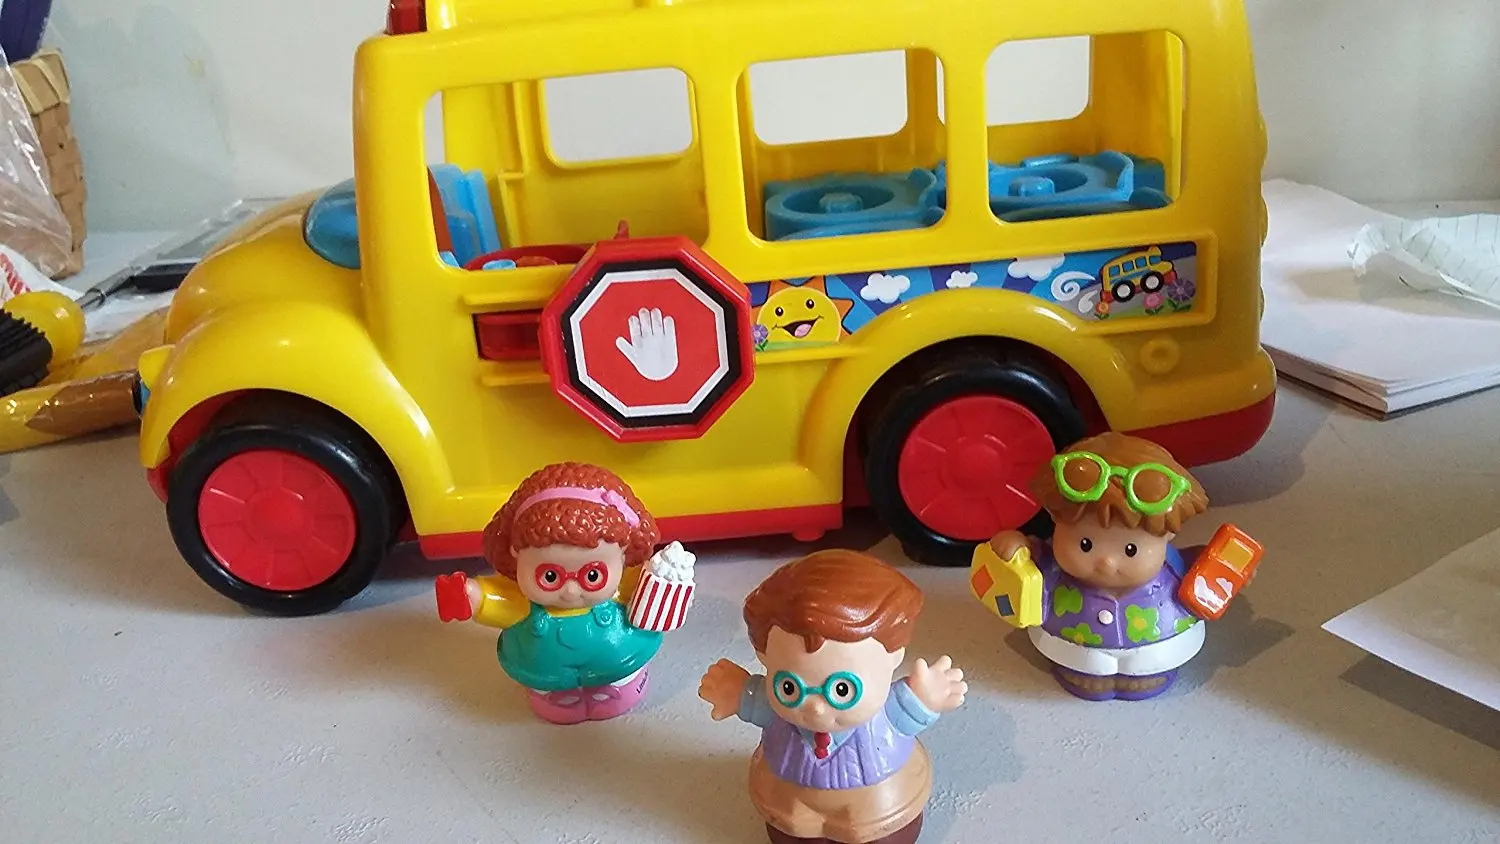 fisher price bus toy